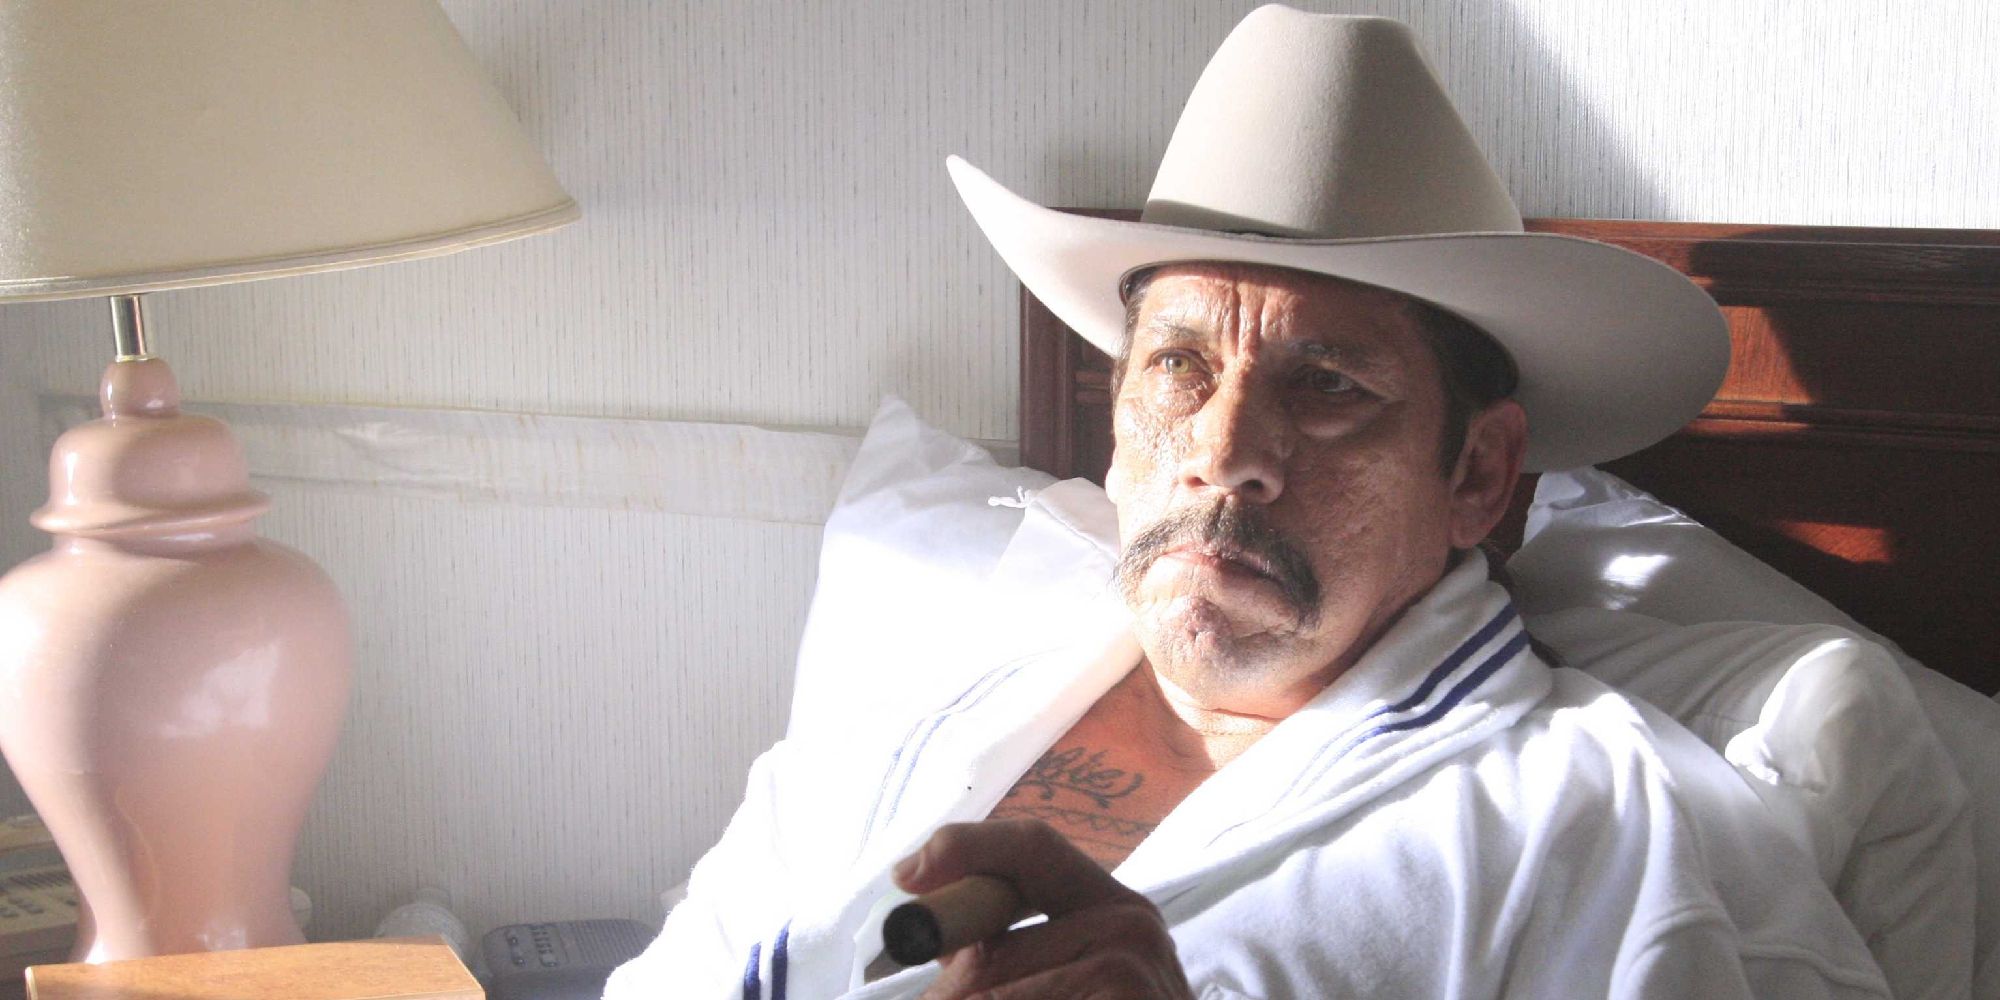 Danny Trejo as Tortuga sitting on a hotel bed in a cowboy hat and robe, smoking a cigar